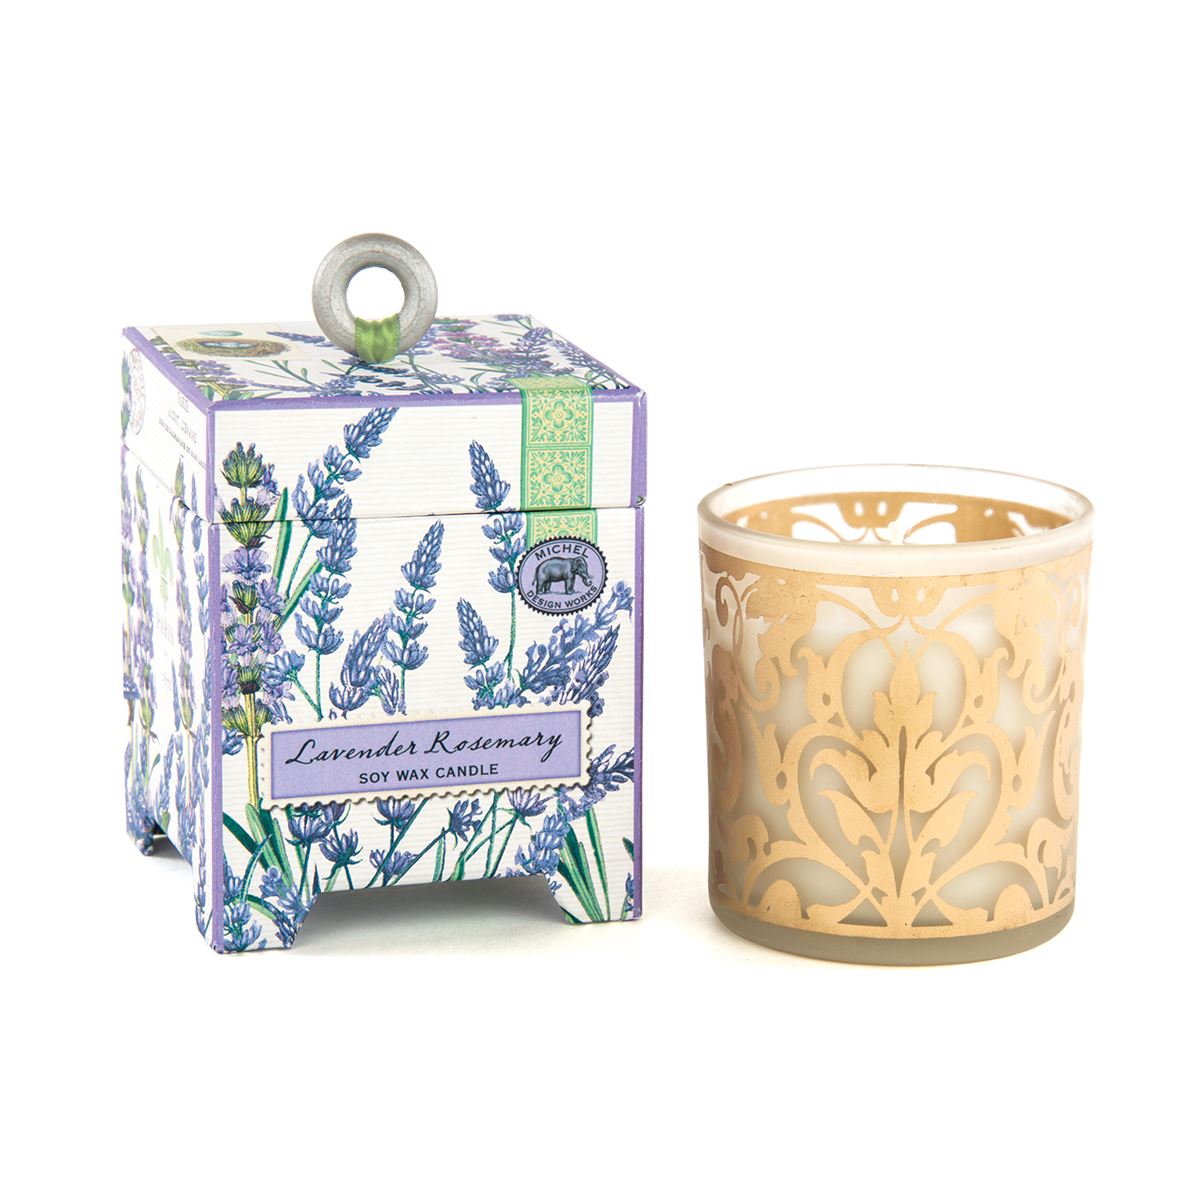 Lavender Rosemary 6.5oz Soy Wax Candle